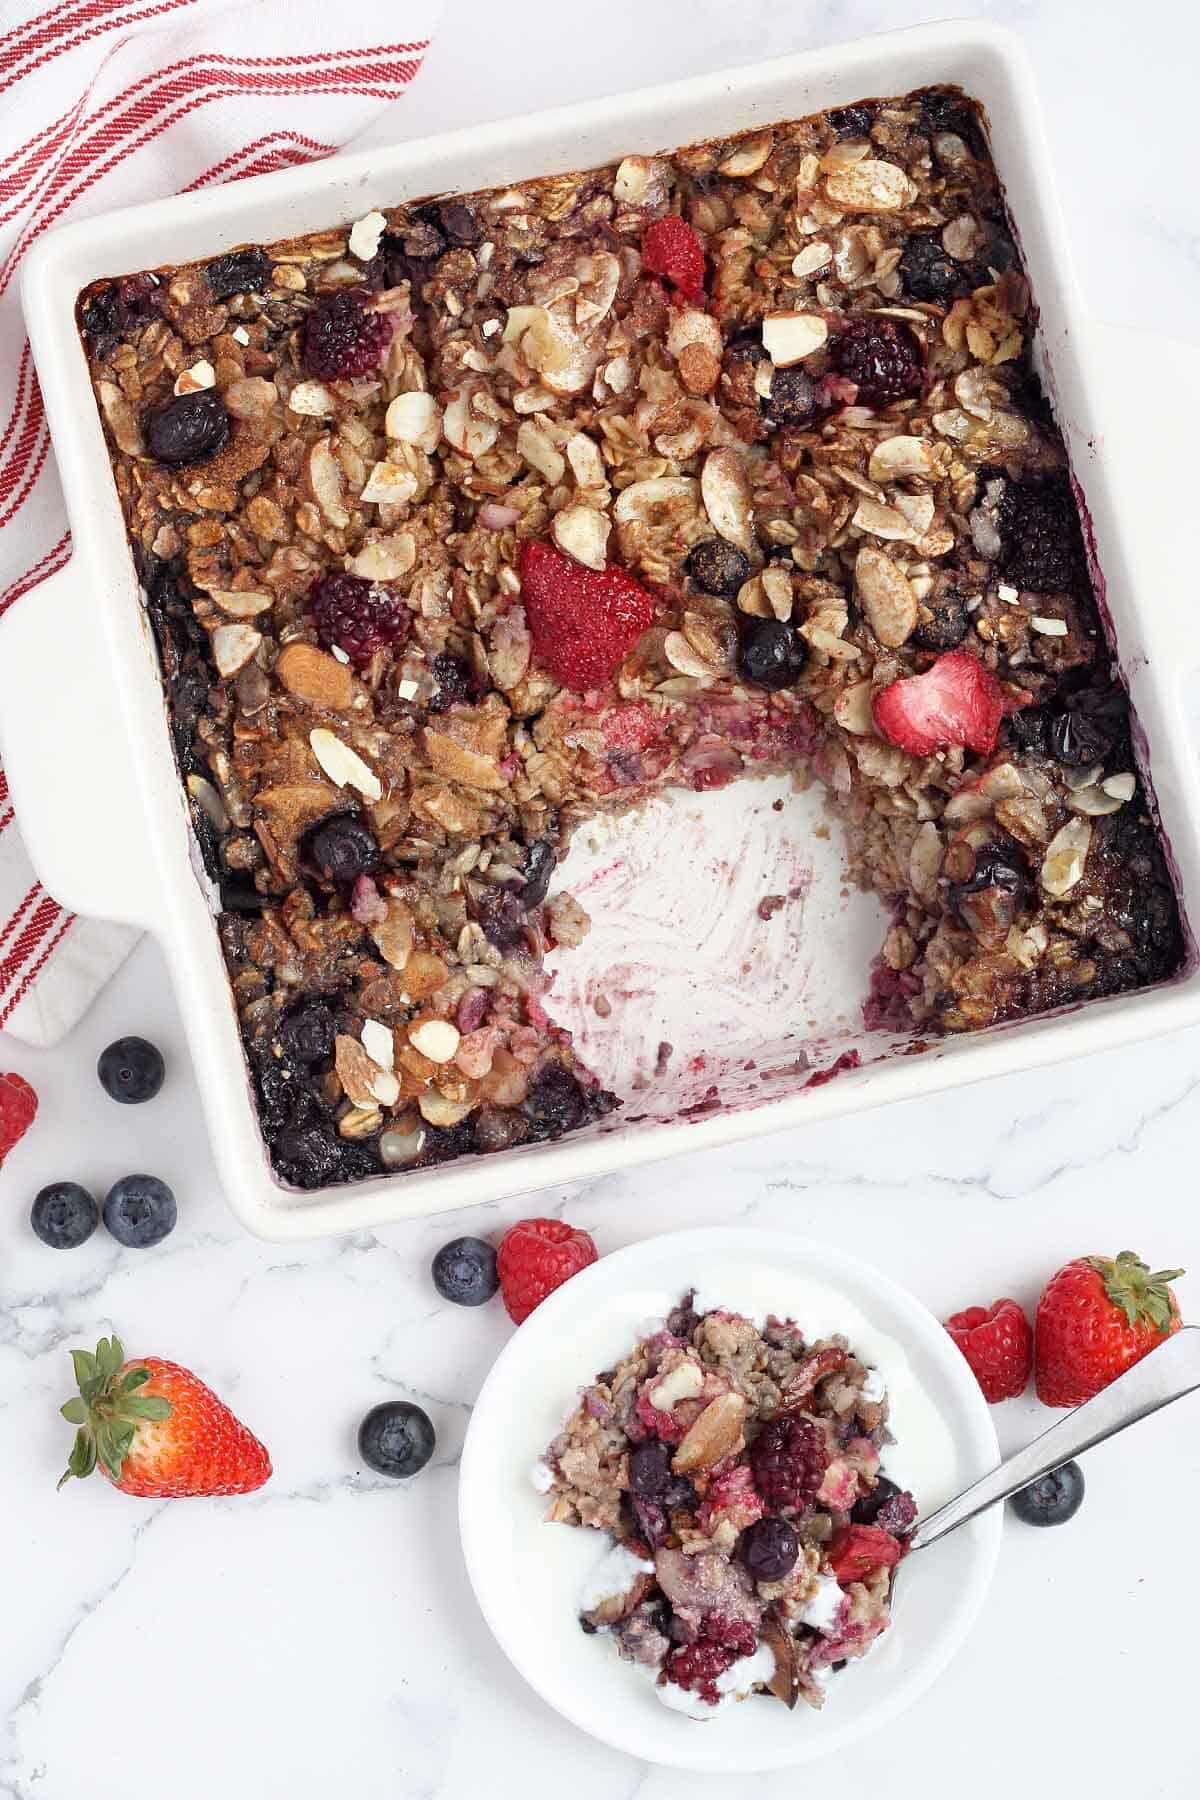 Overhead shot of a baked berry oatmeal casserole with a serving on a white plate.
